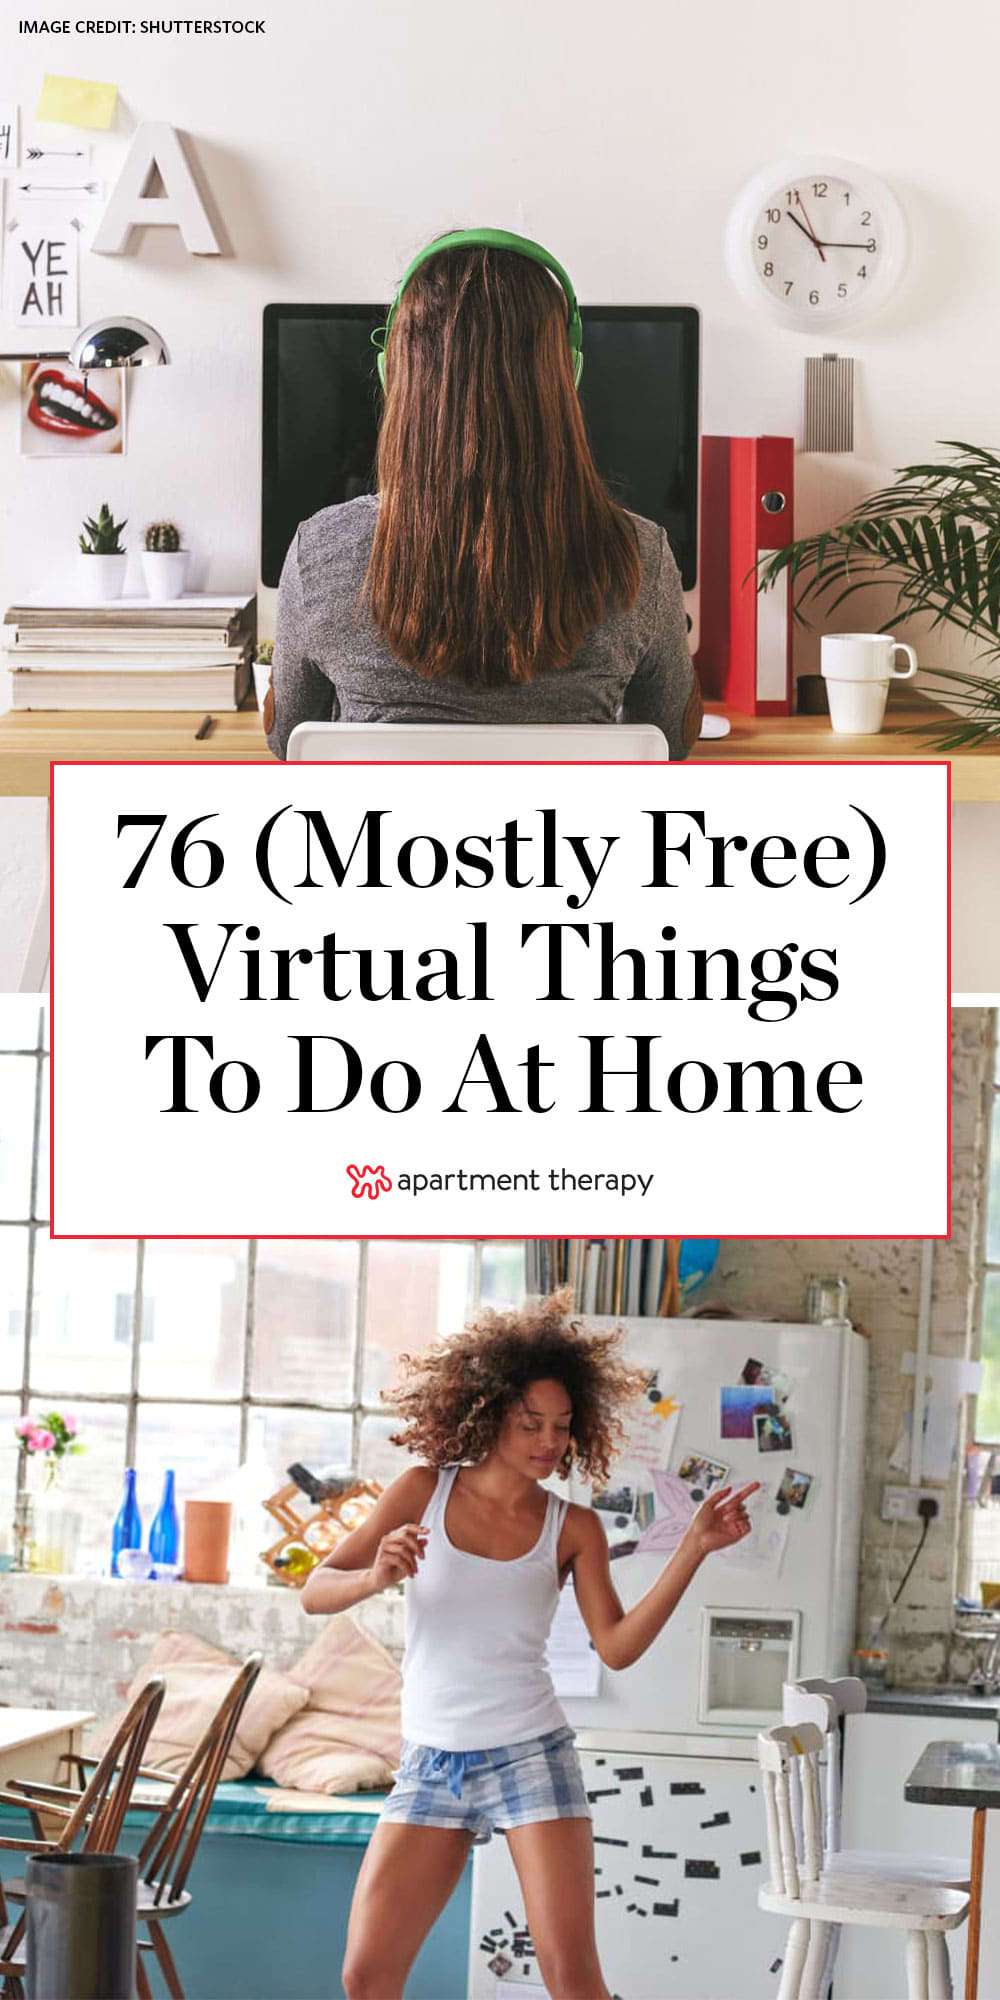 Virtual Things To Do at Home | Apartment Therapy